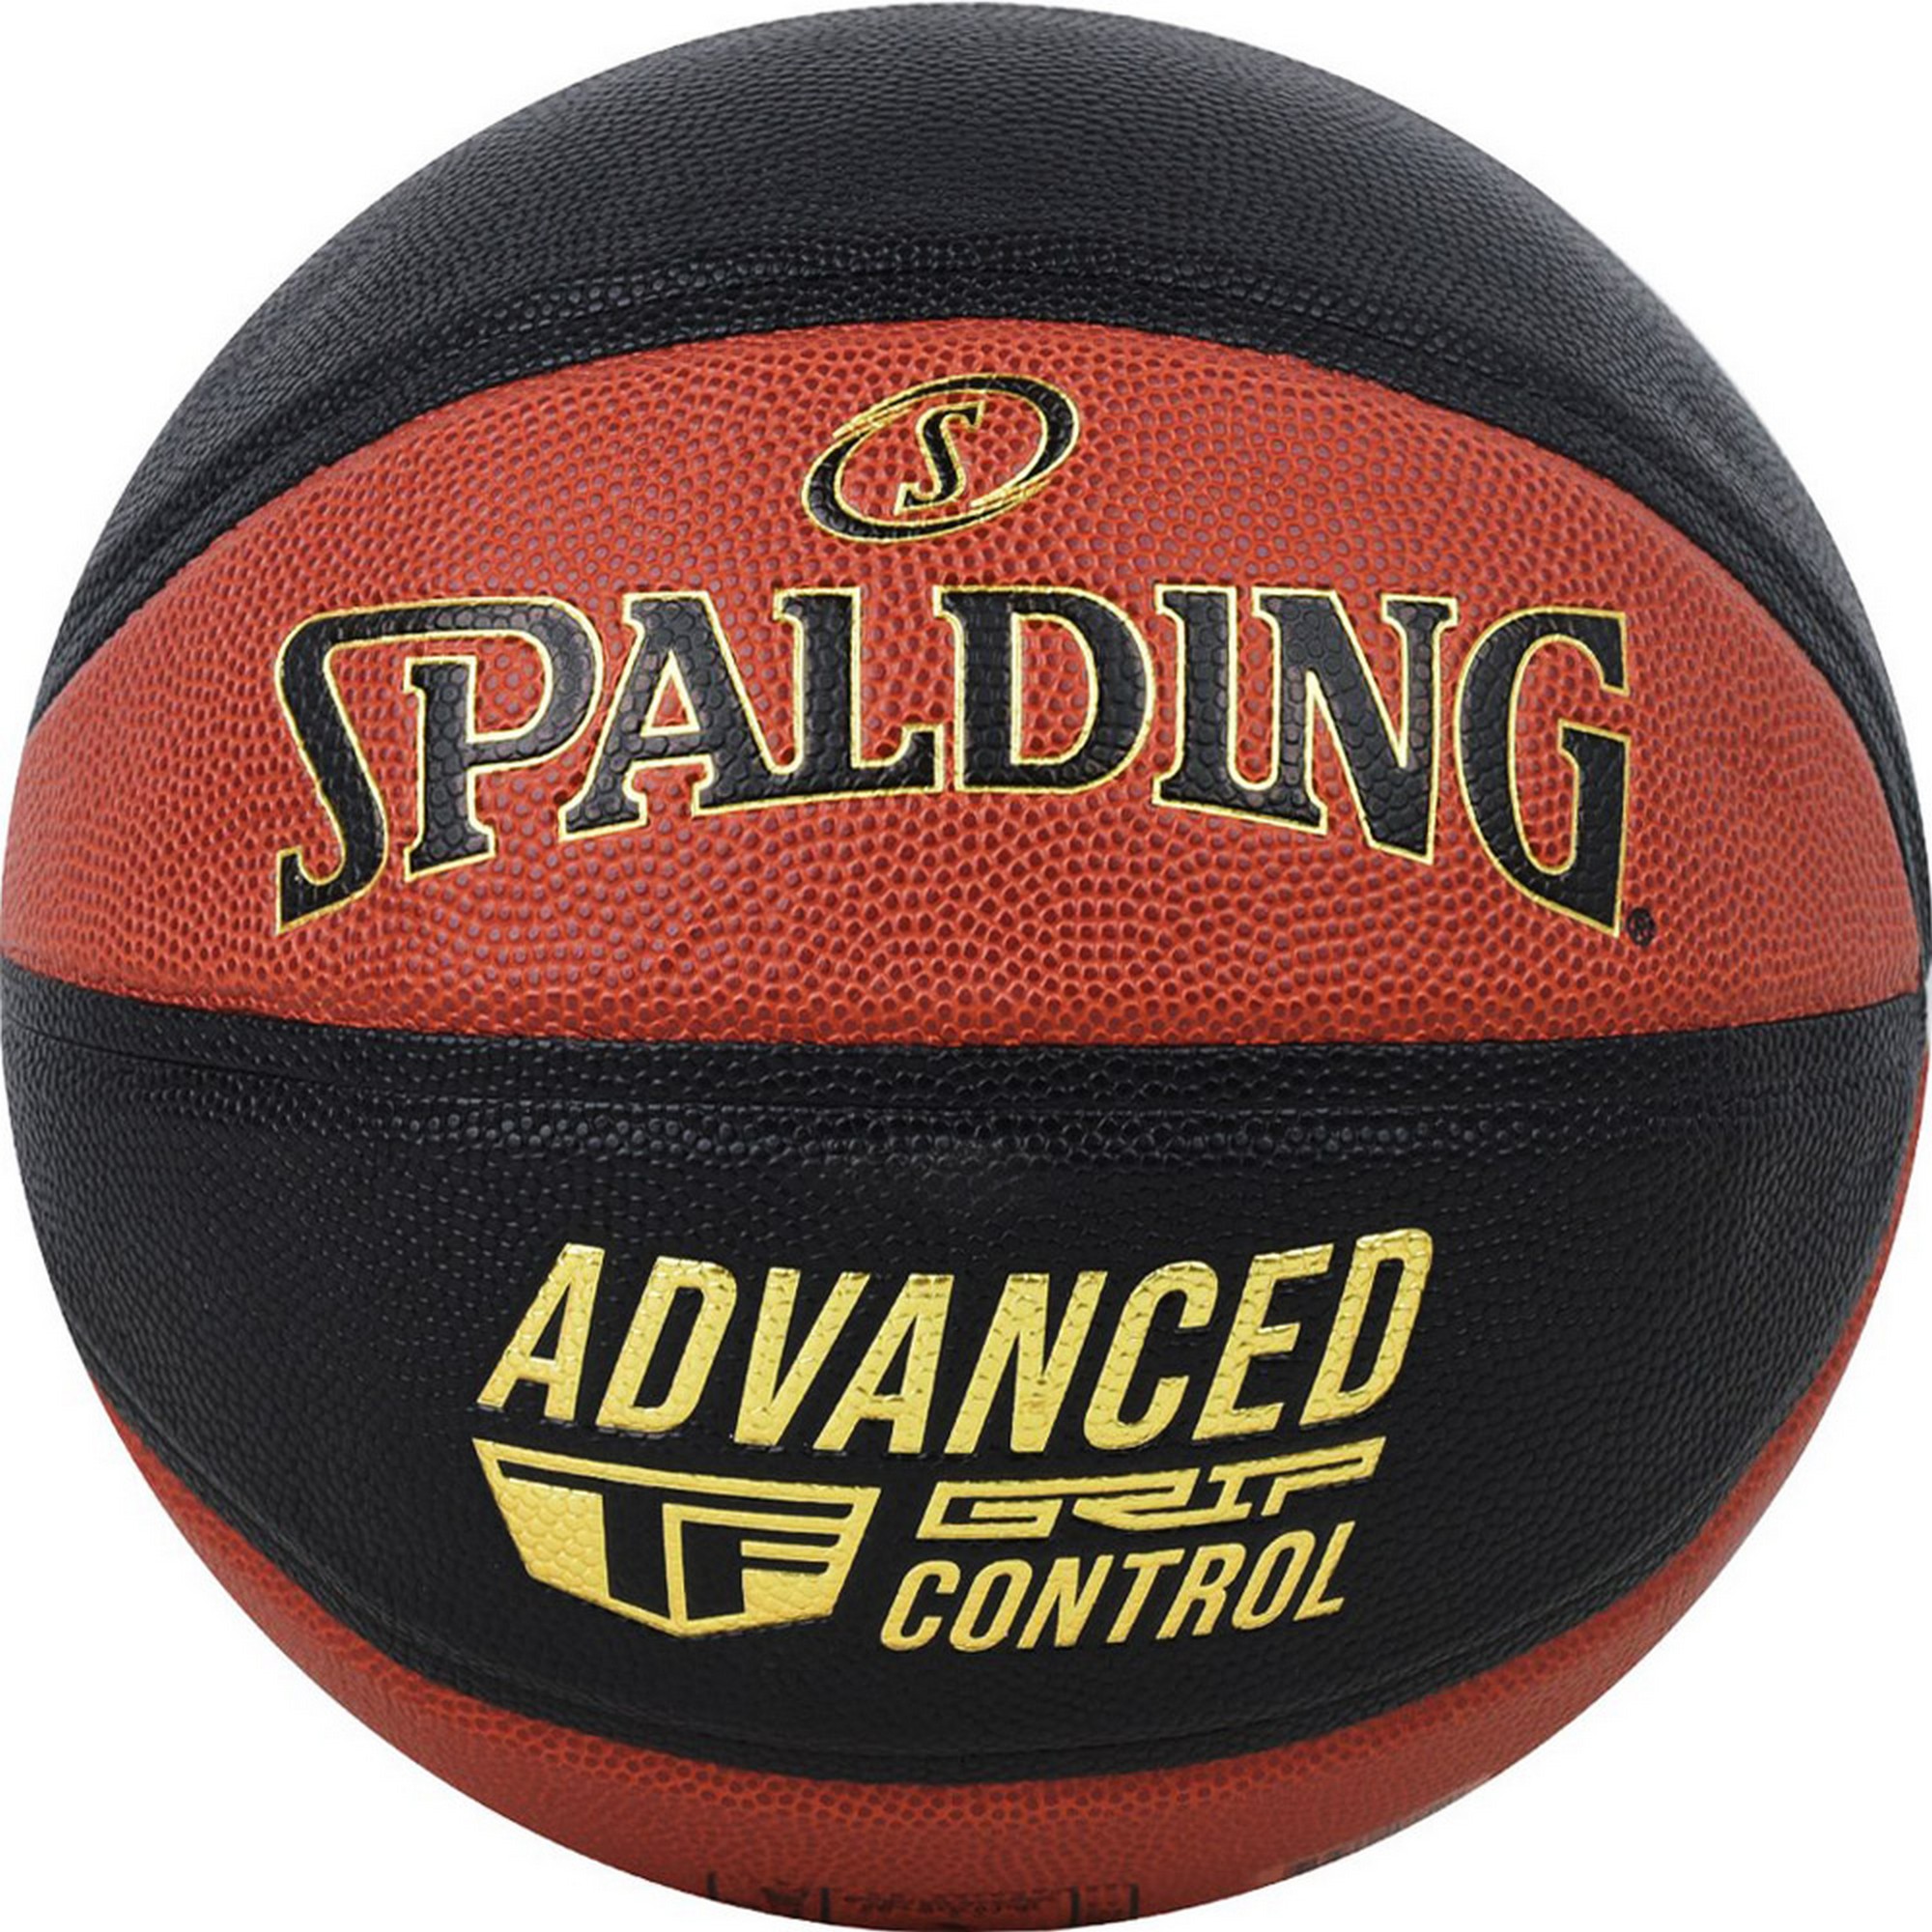   Spalding Advanced Grip Control In/Out 76872z .7